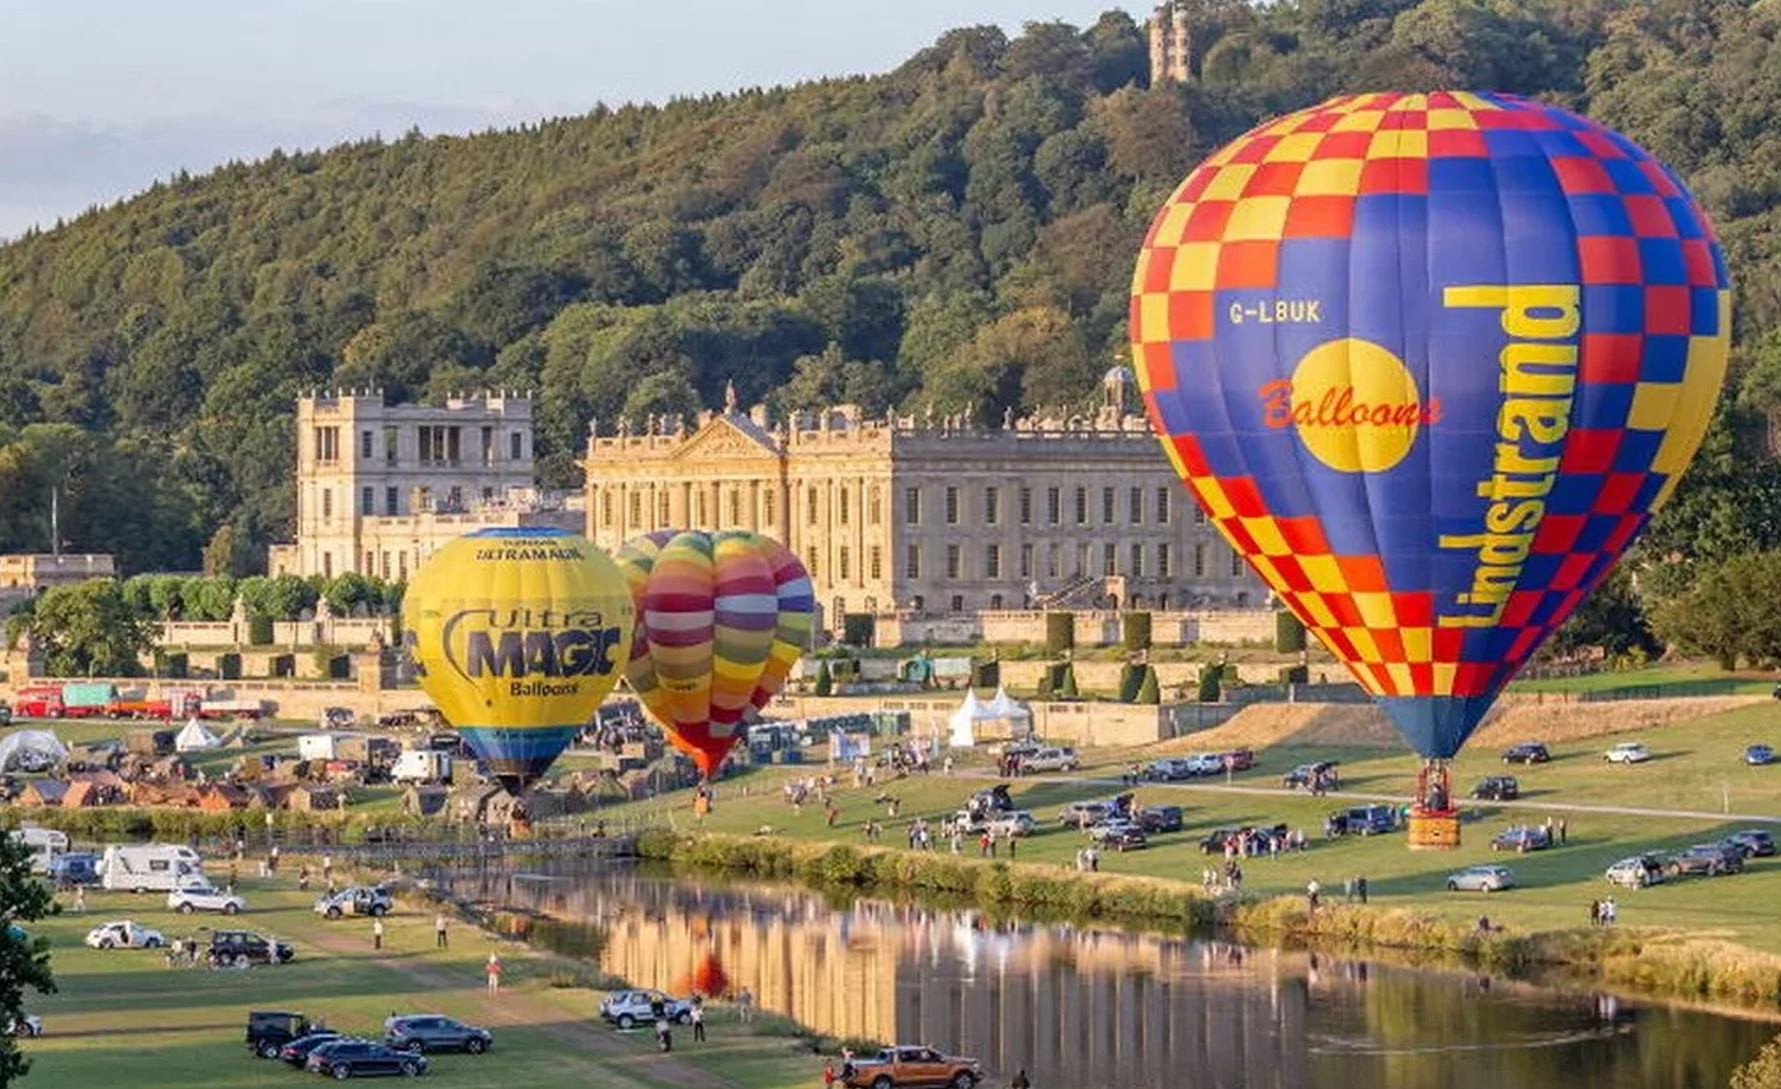 Large Balloons ascending over Chatsworth House